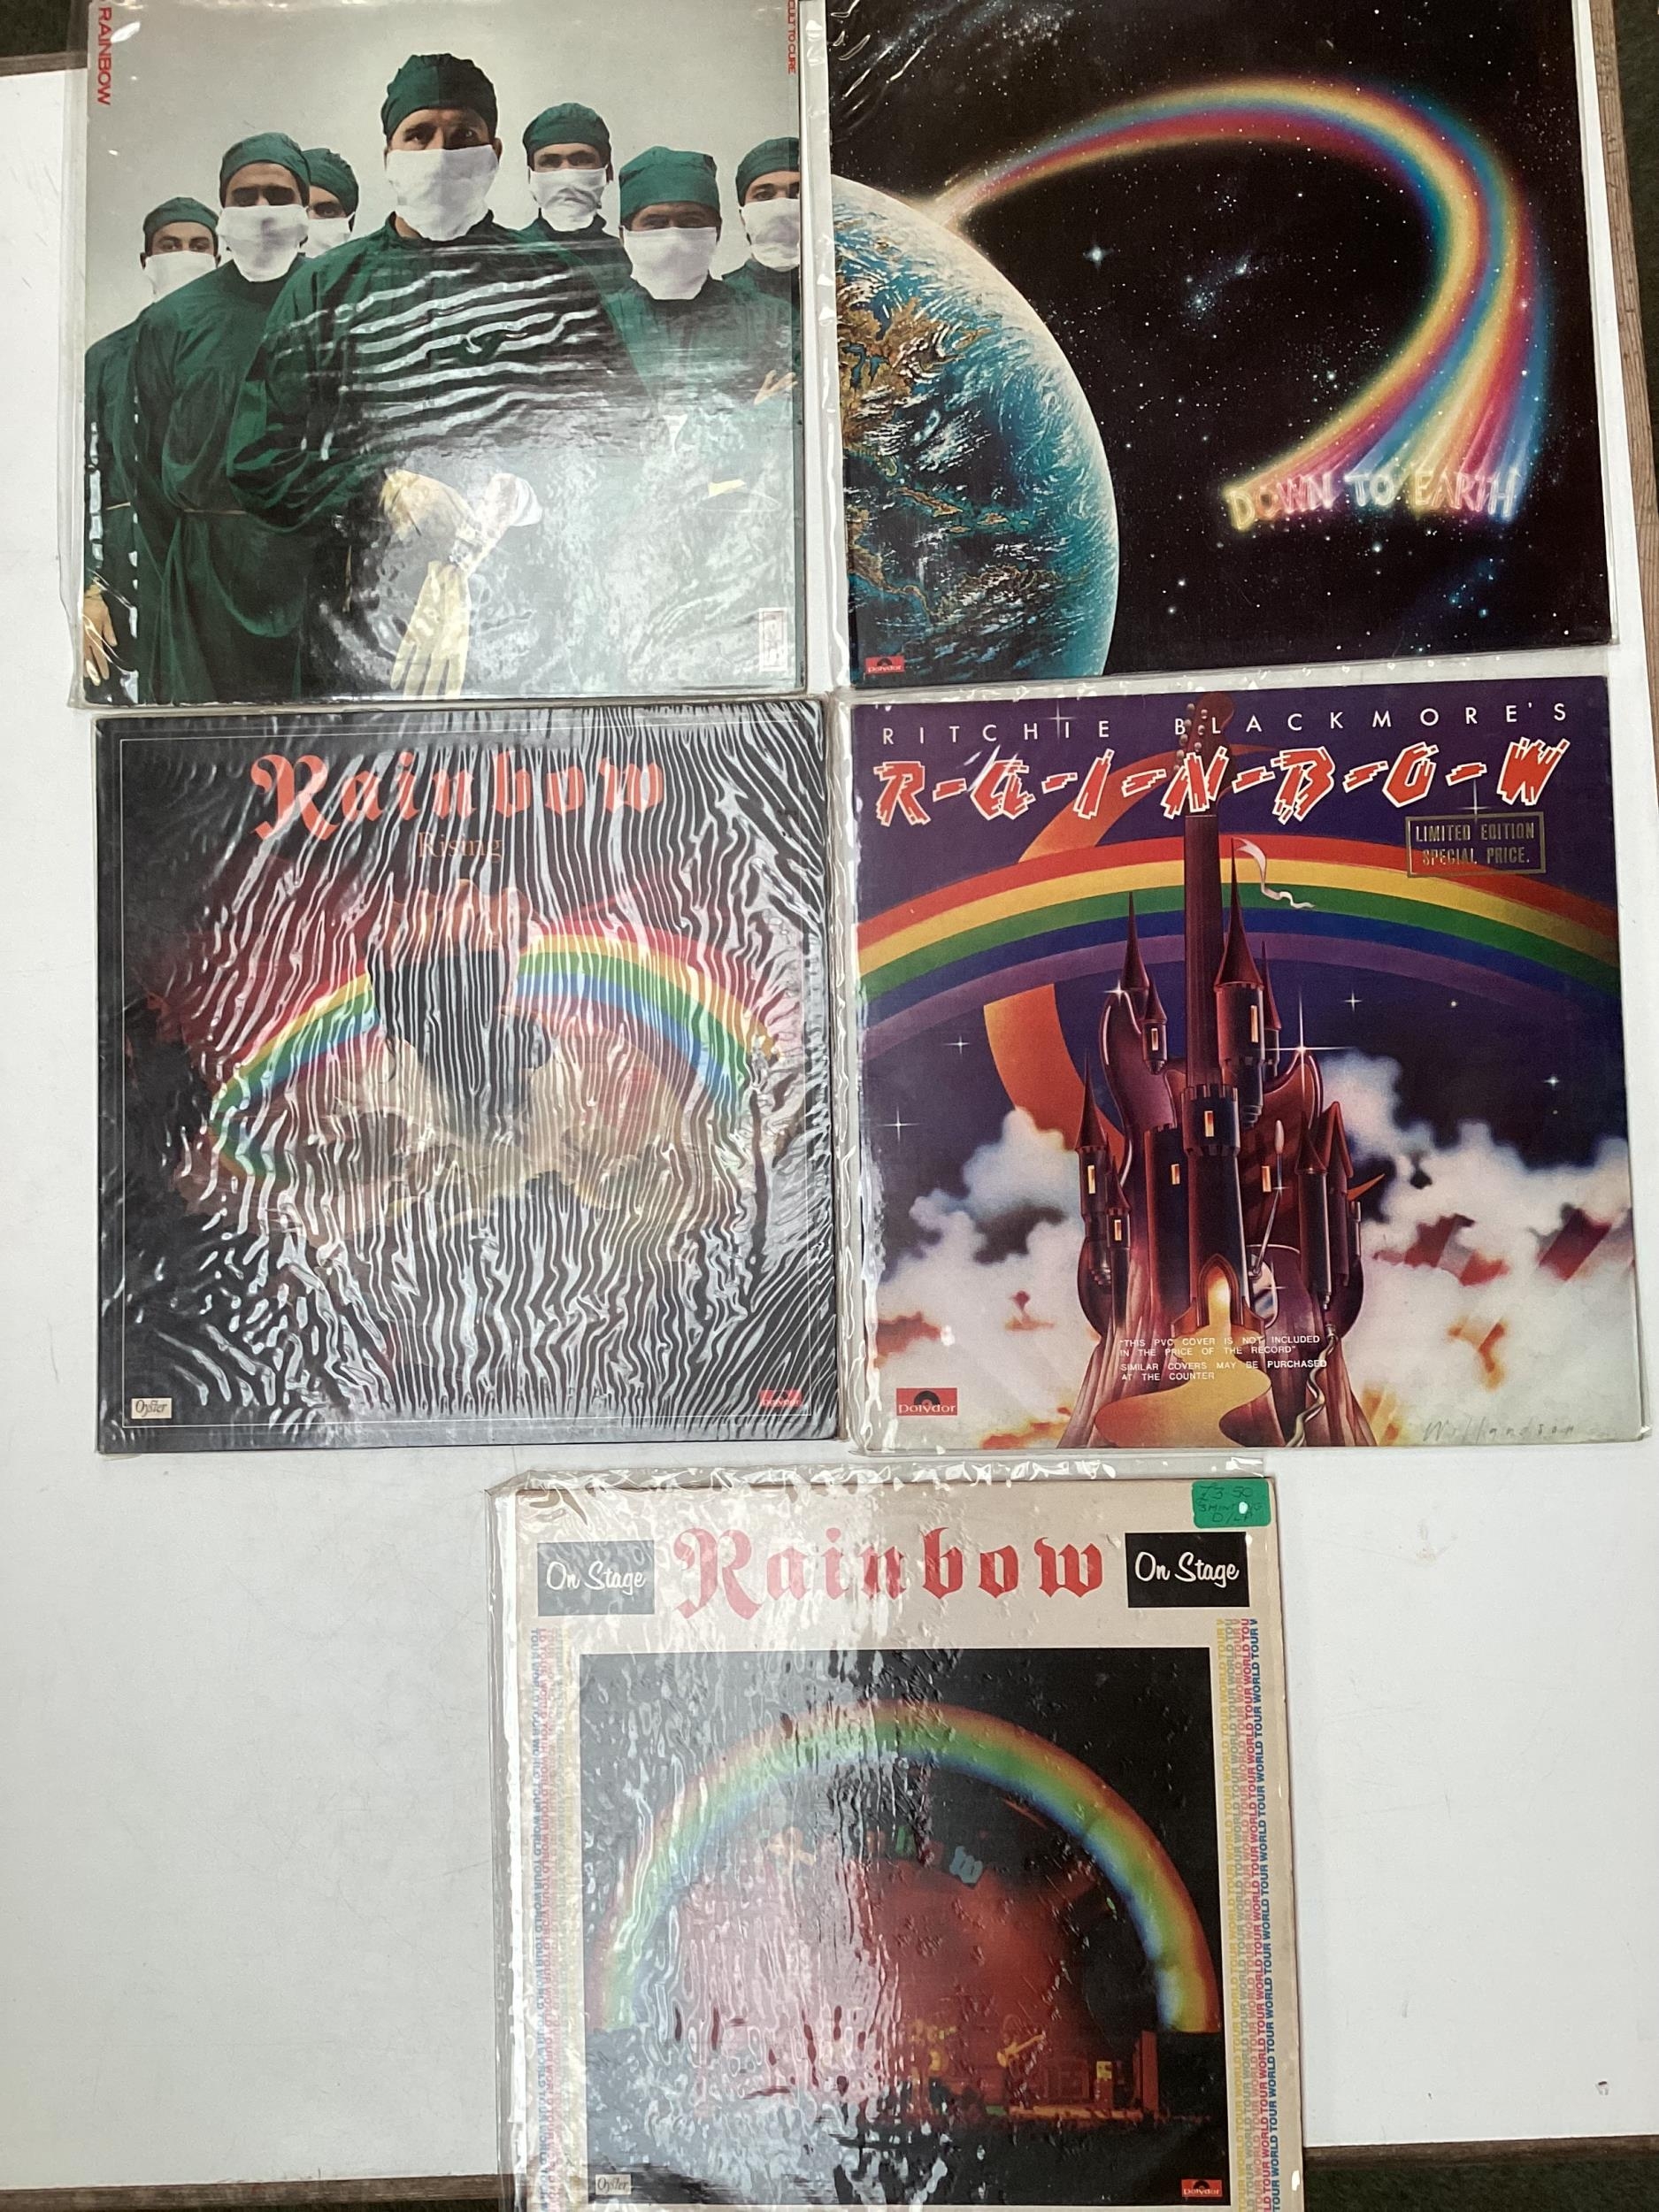 Vinyl Records (five), see photos for a selection of Albums. Rainbow on stage, Rainbow Rising,